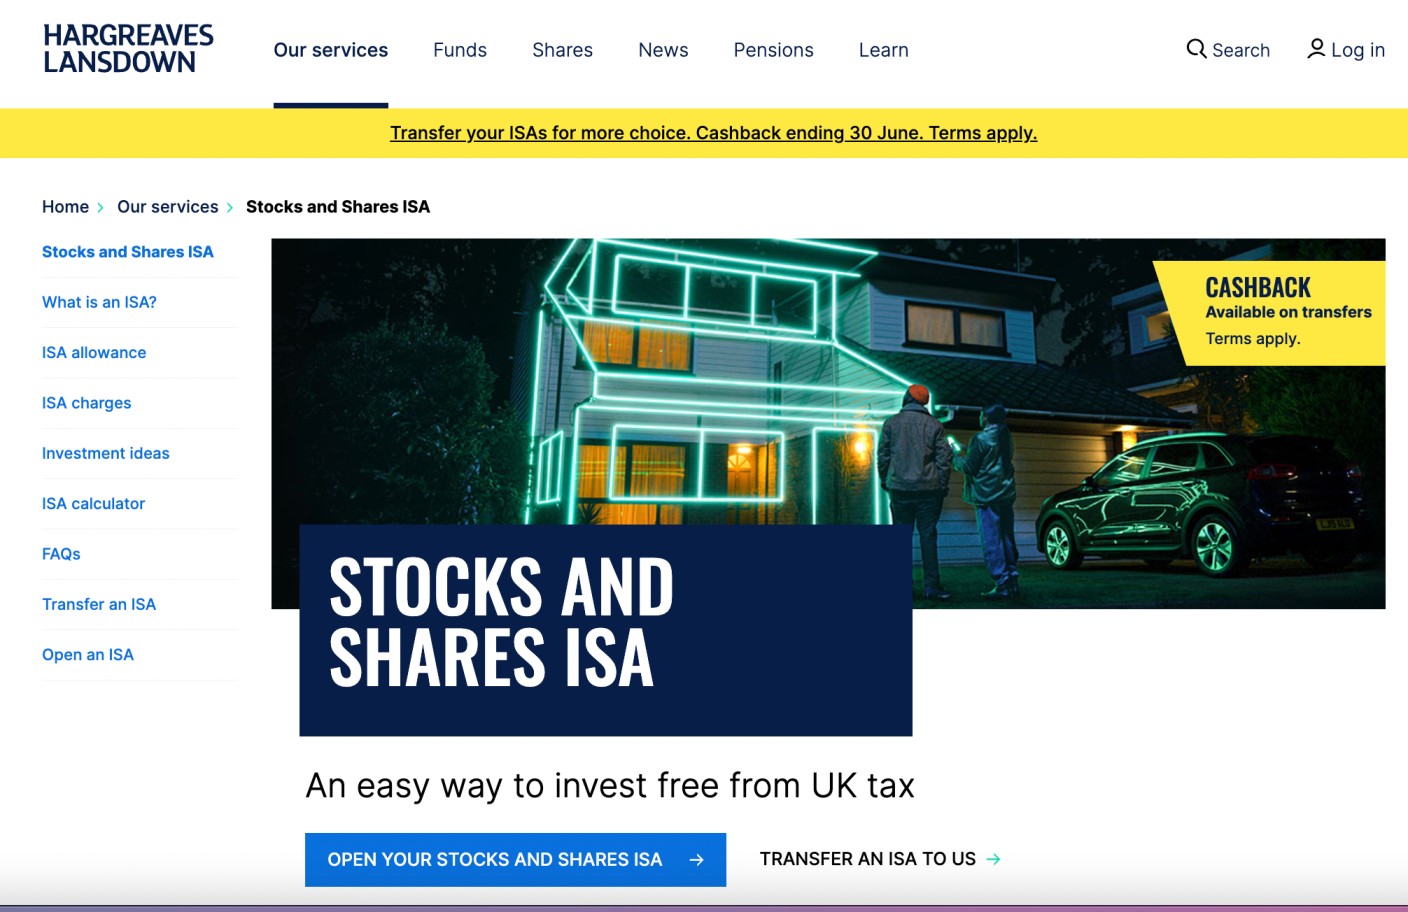 hargreaves lansdown review 